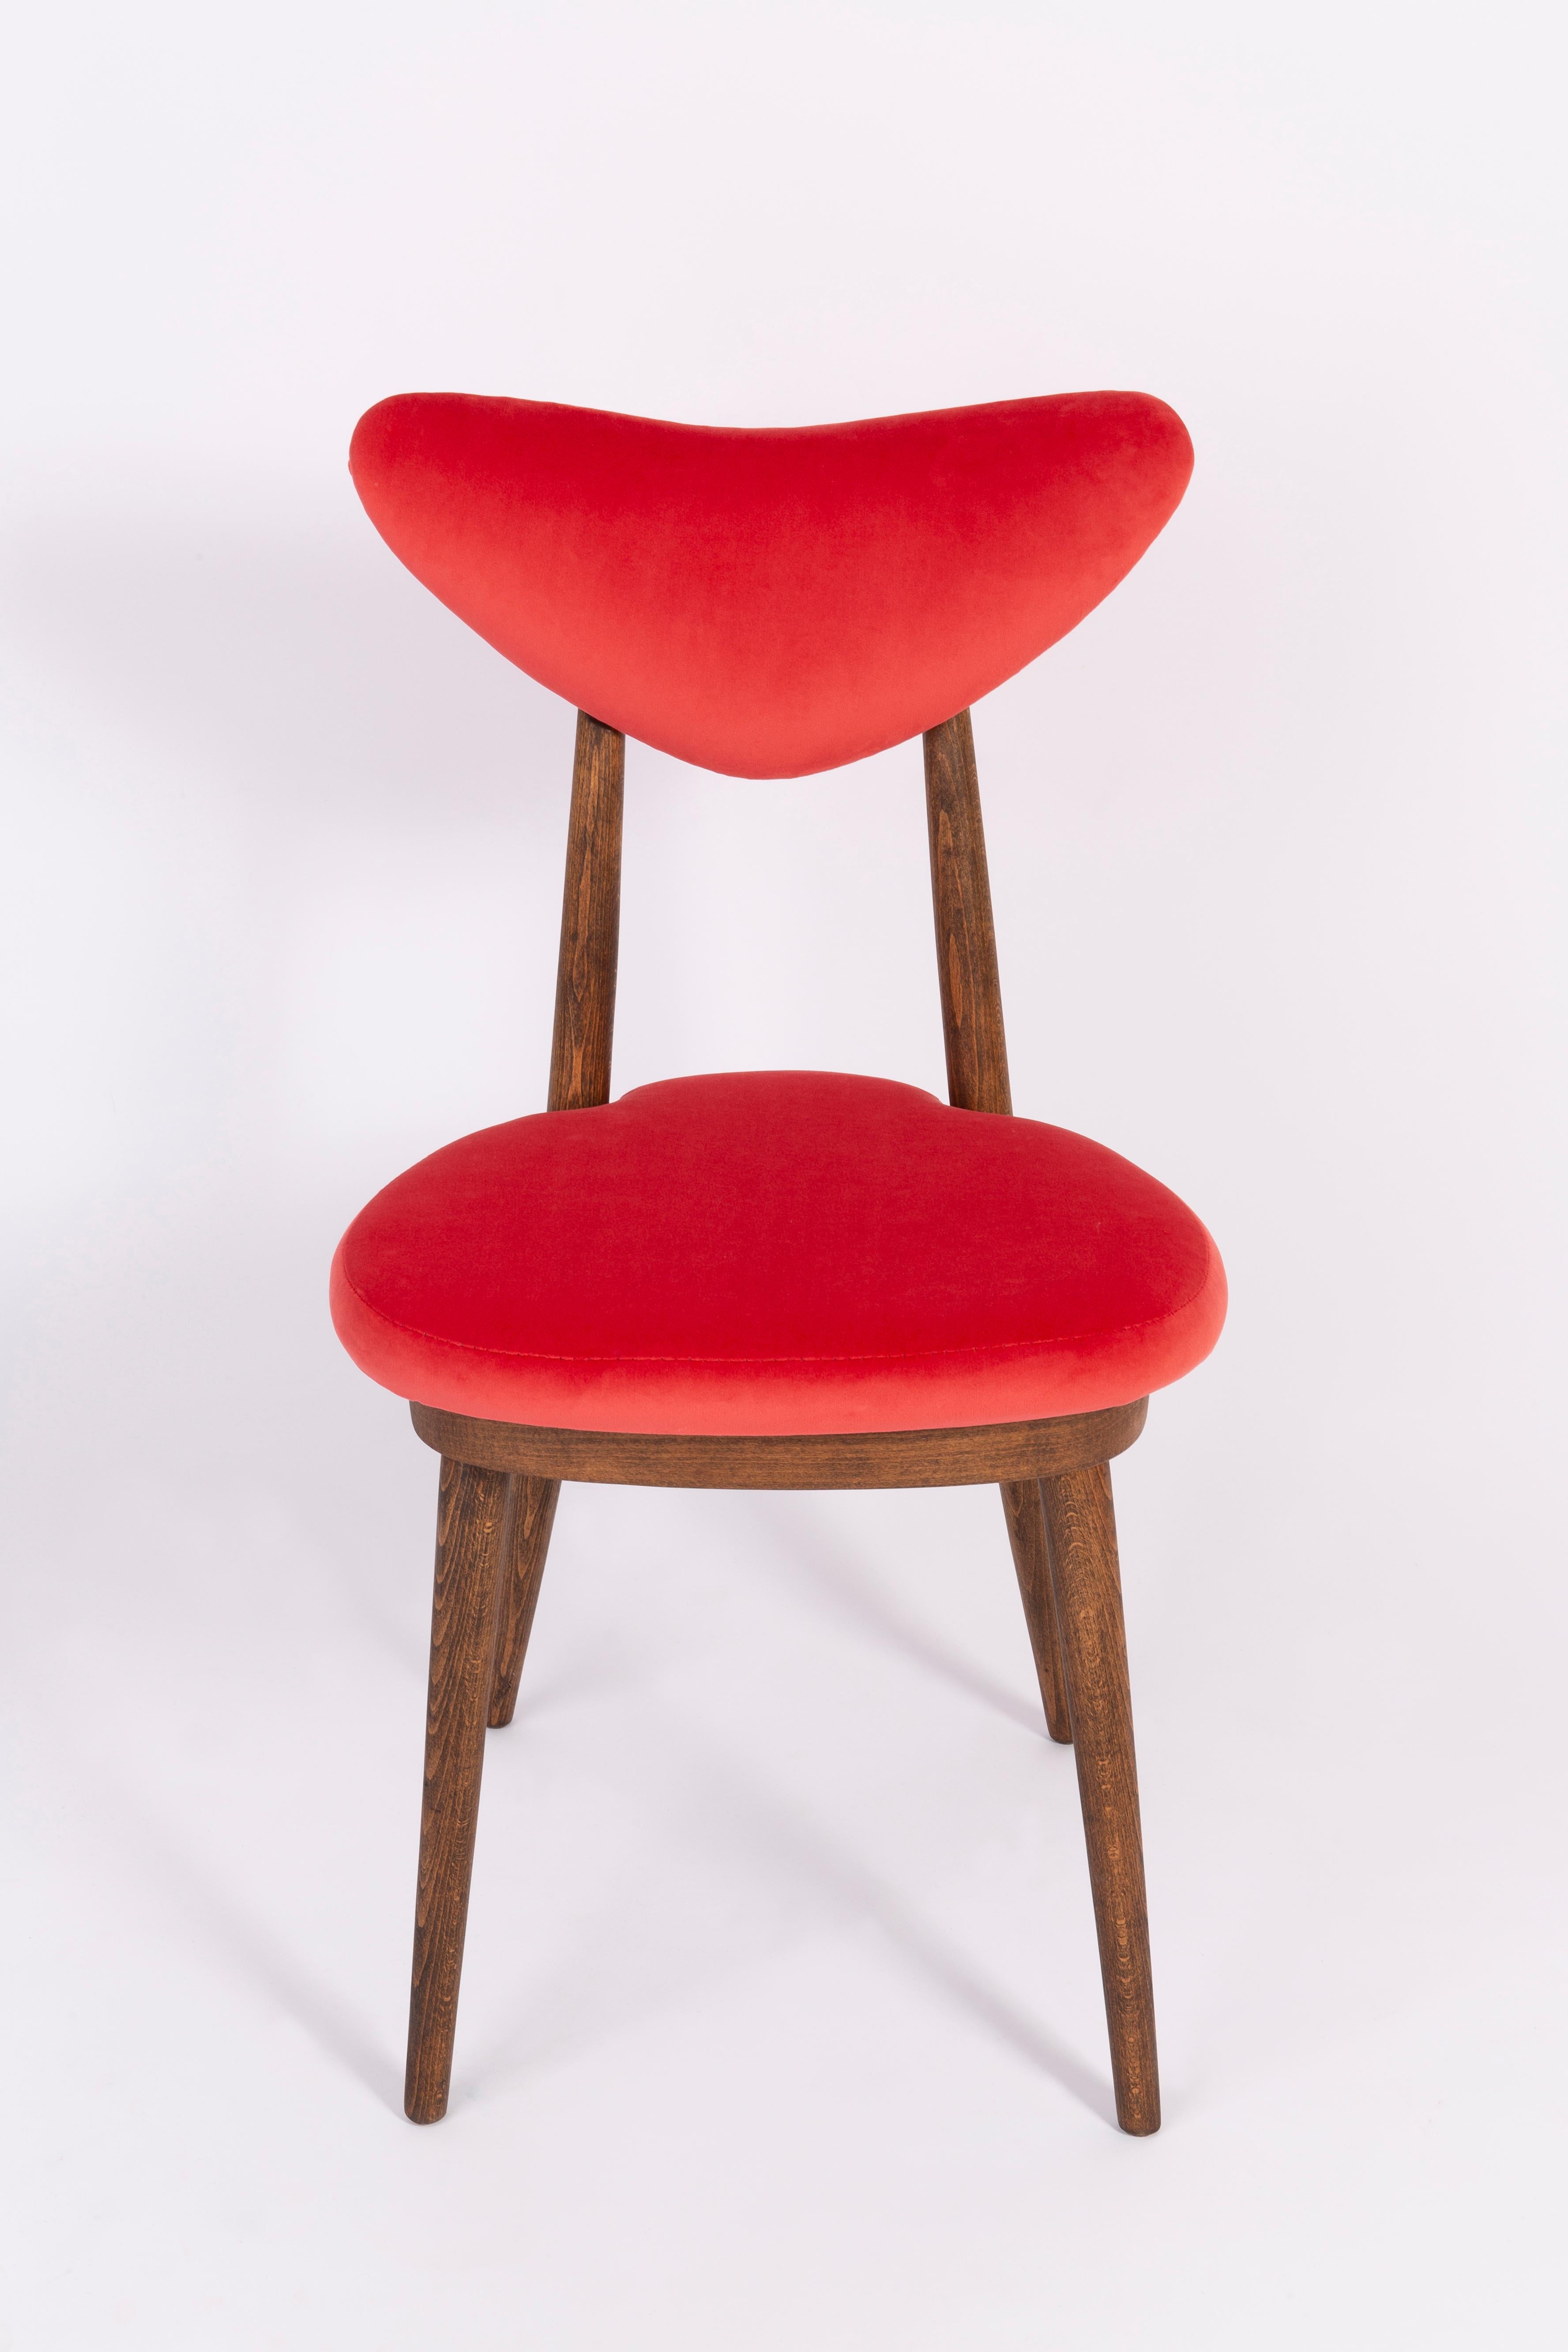 Set of Eight Red Heart Chairs, Poland, 1960s For Sale 6